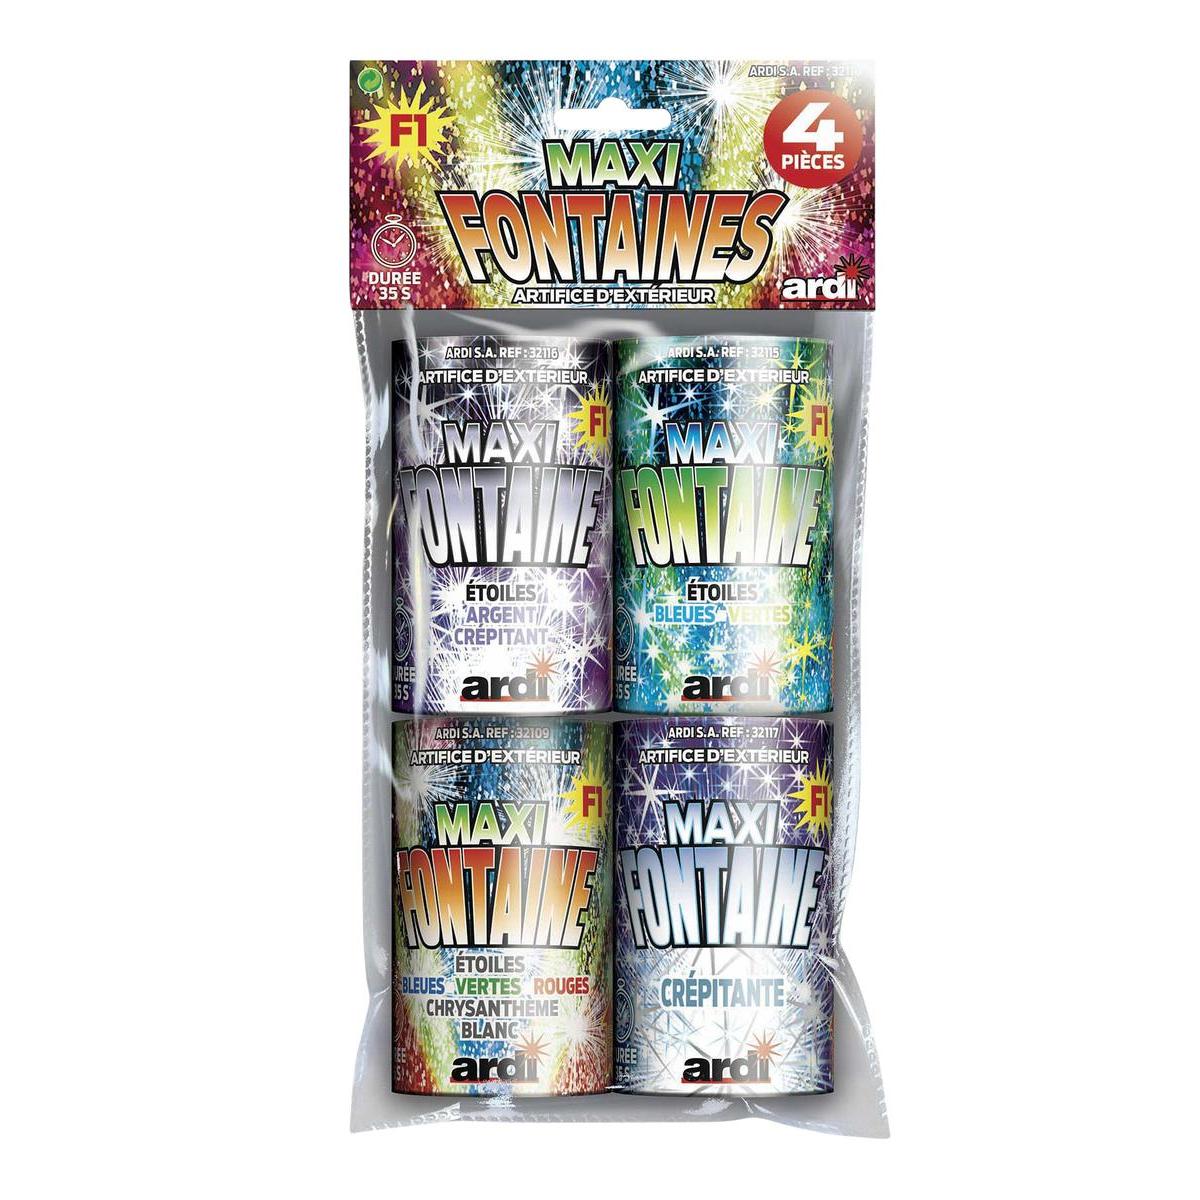 4 sachets Maxi Fontaines